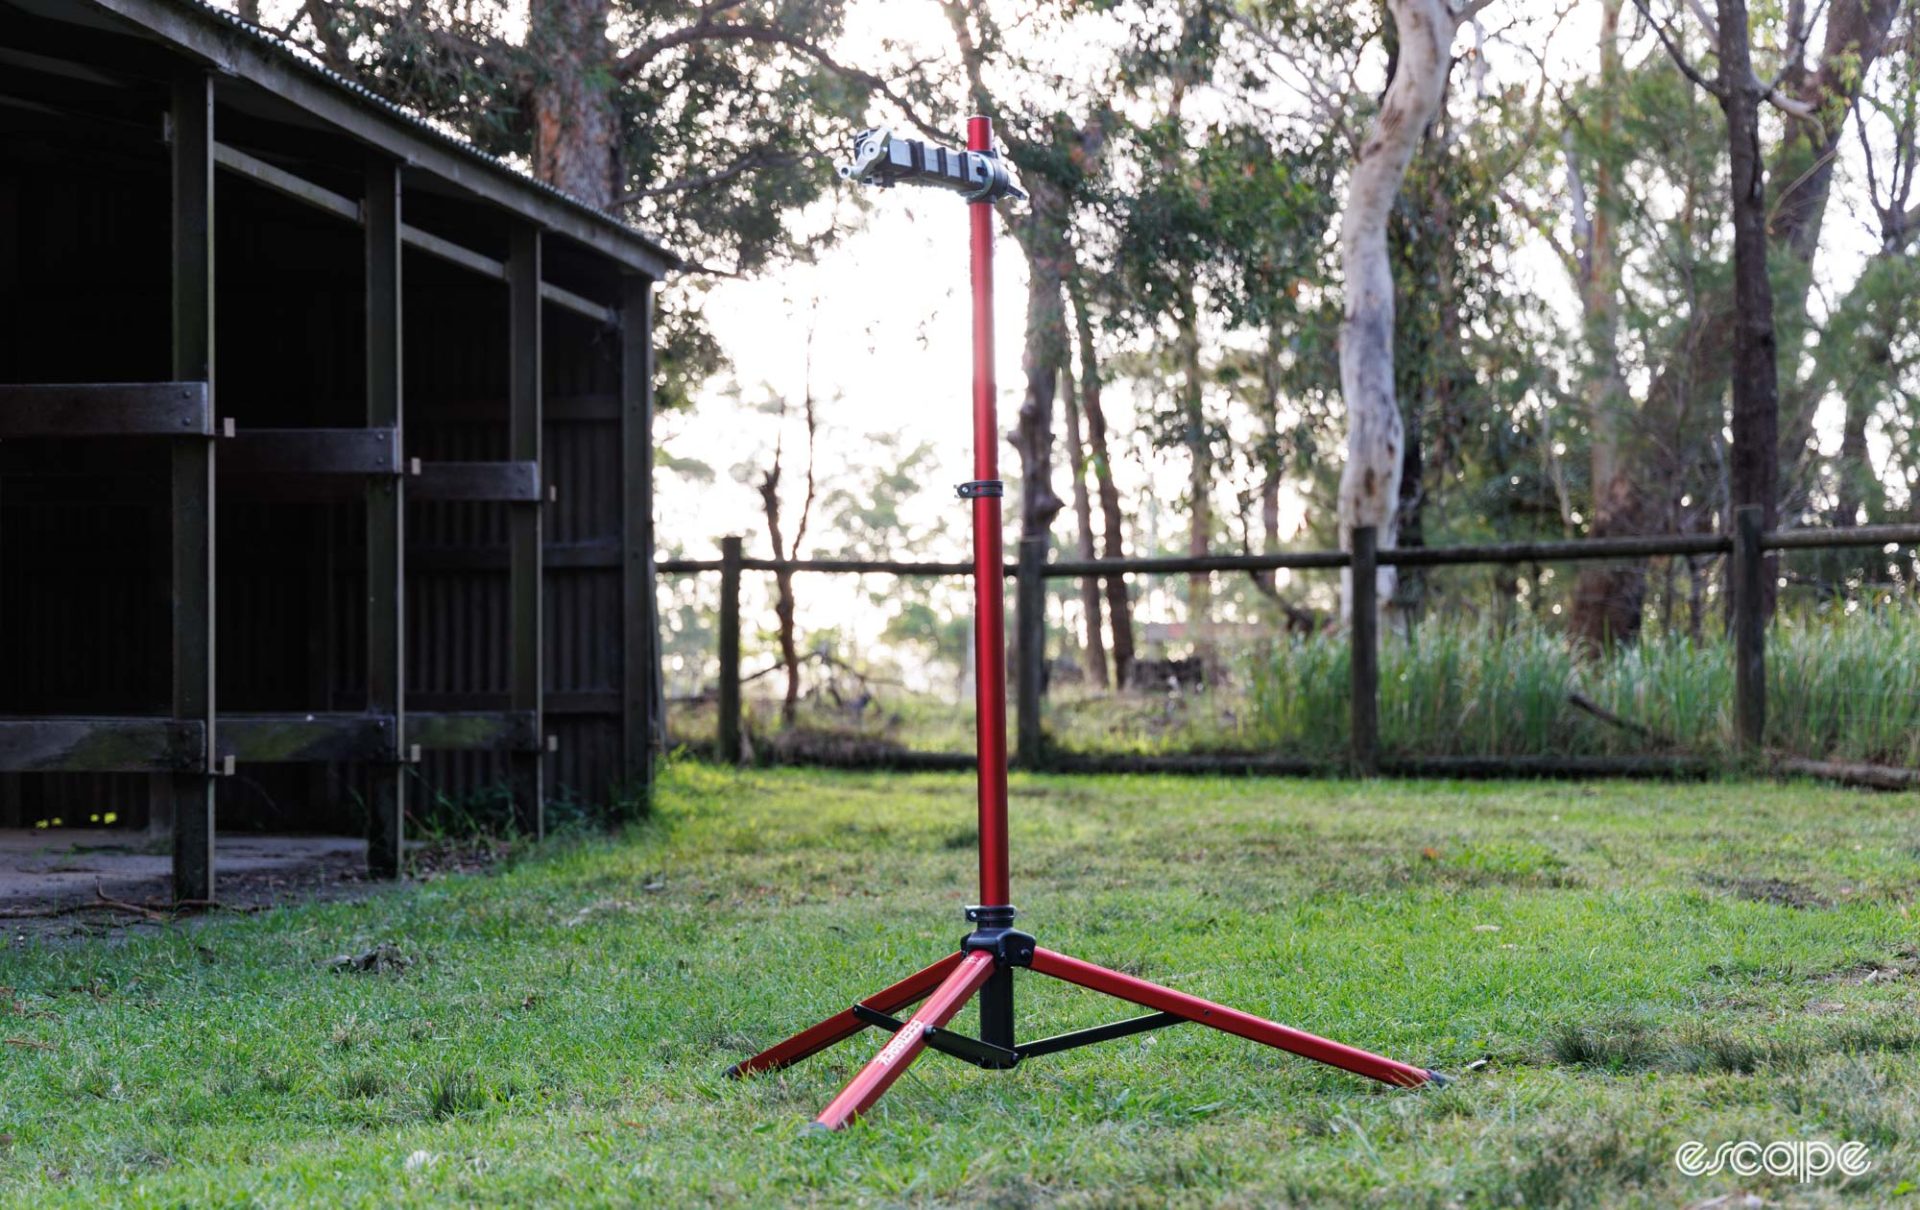 Elite Race Workstand review  RUNNING, CYCLING AND TECH REVIEWS